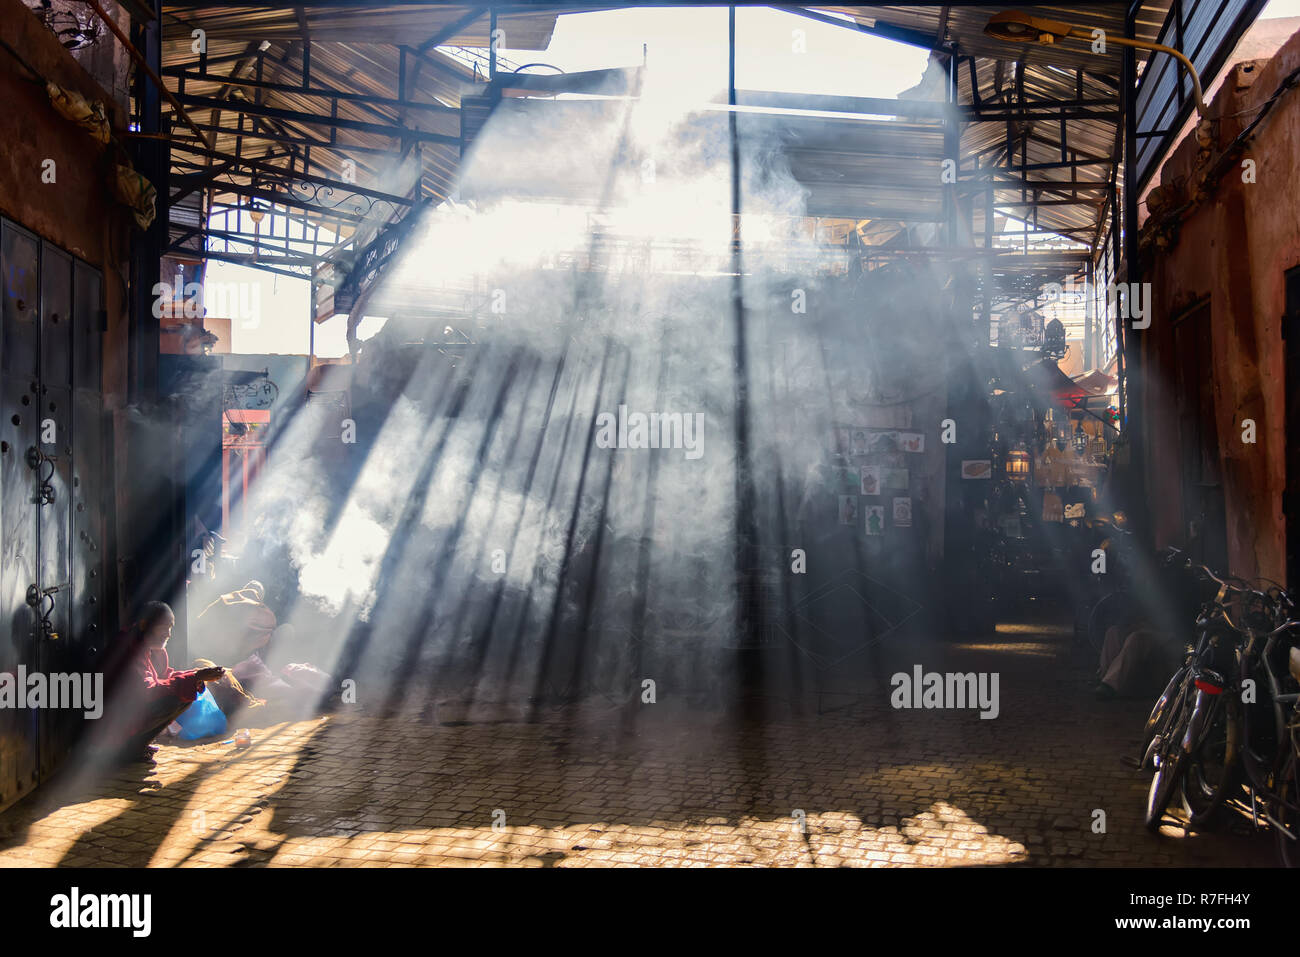 Marrakech, Morocco - December 30, 2017: Sunlight entering in the dark Souk Haddadine. A souq or souk is a marketplace or commercial quarter Stock Photo